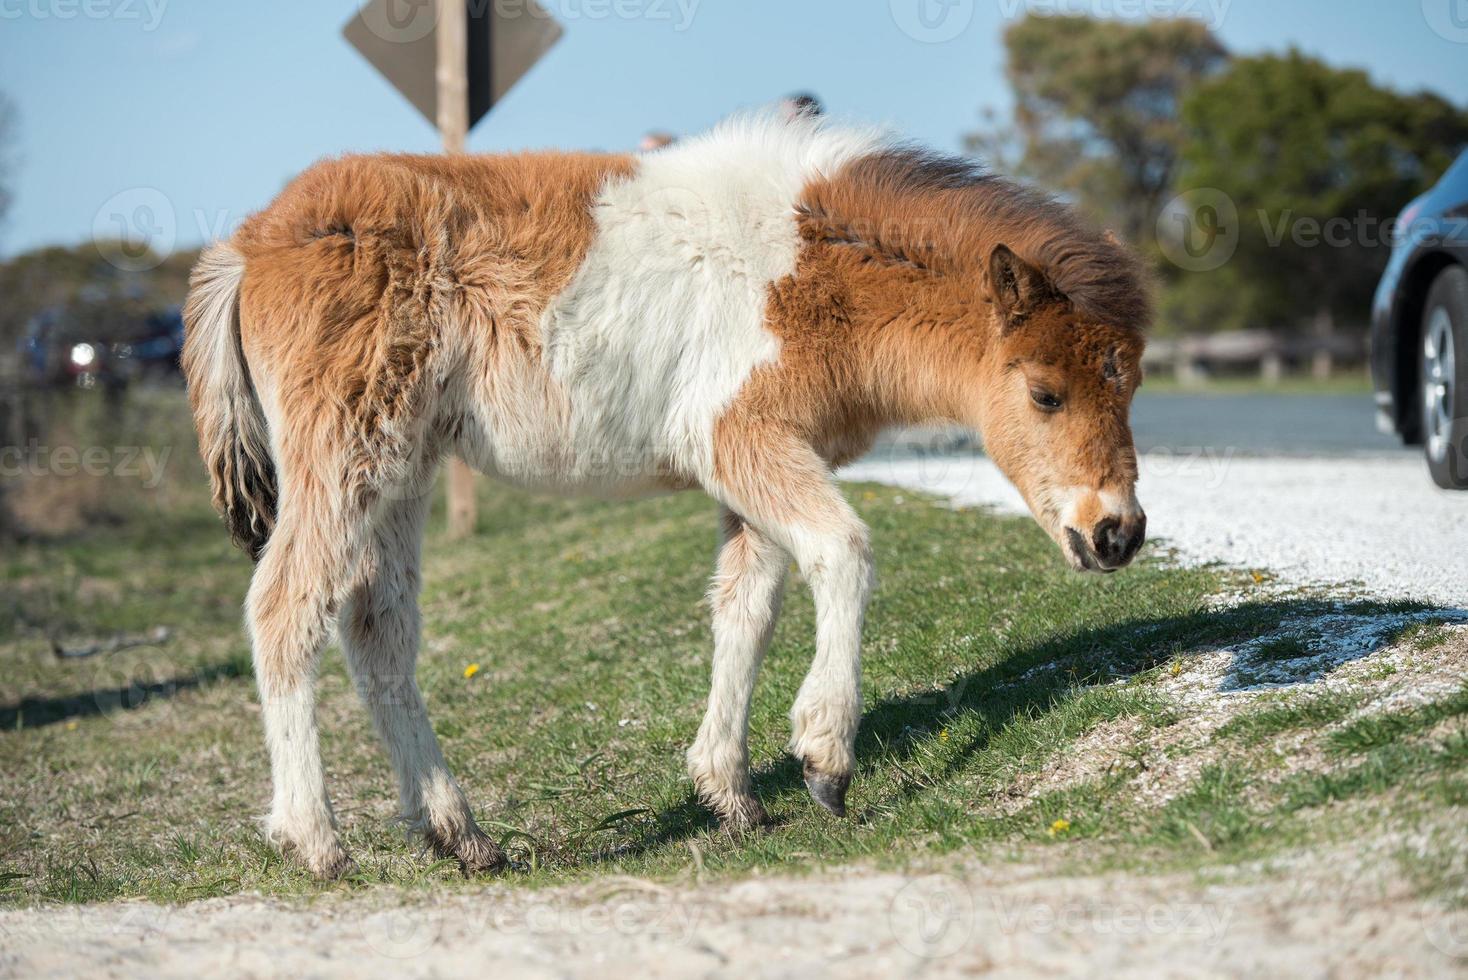 Assateague horse baby young puppy wild pony photo